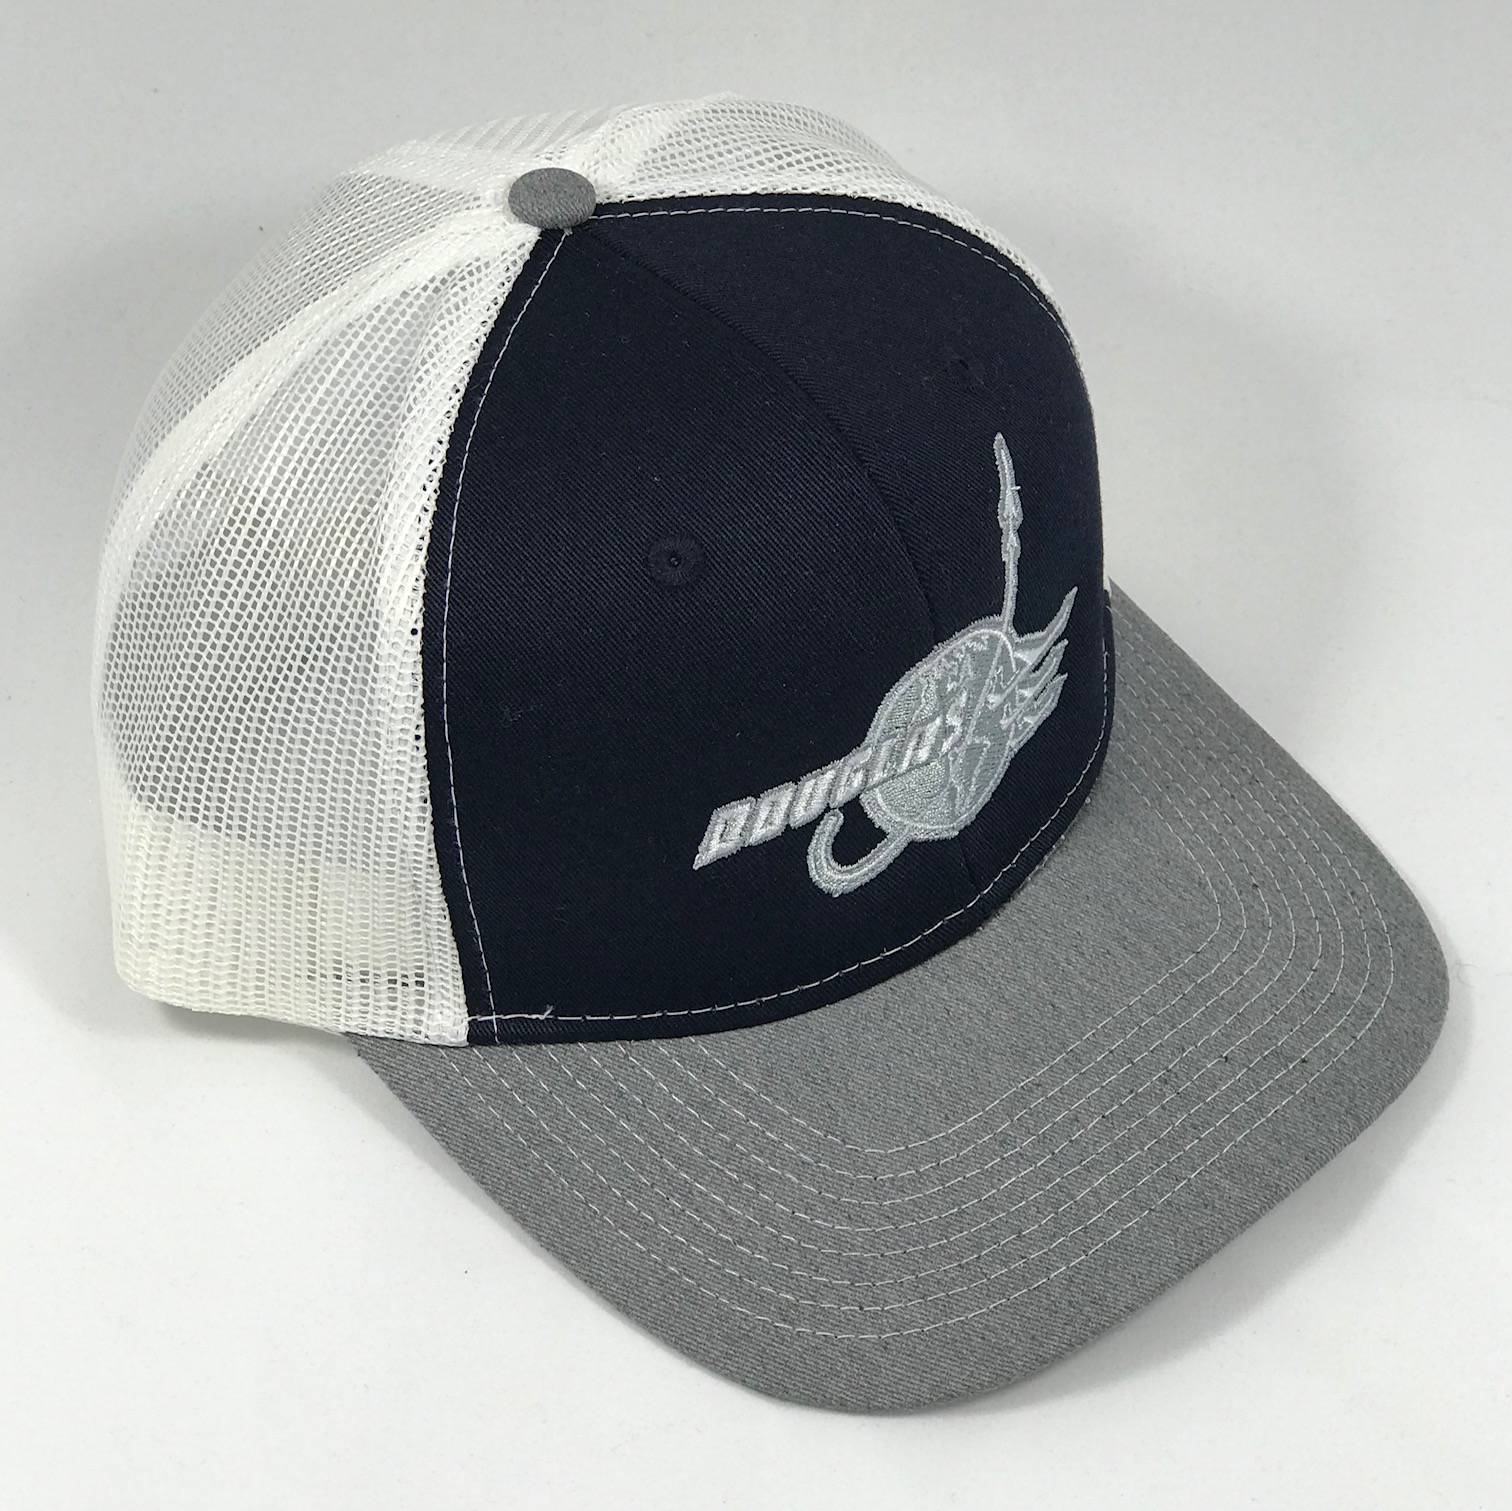 Aircraft Company Hats — Valley of Speed